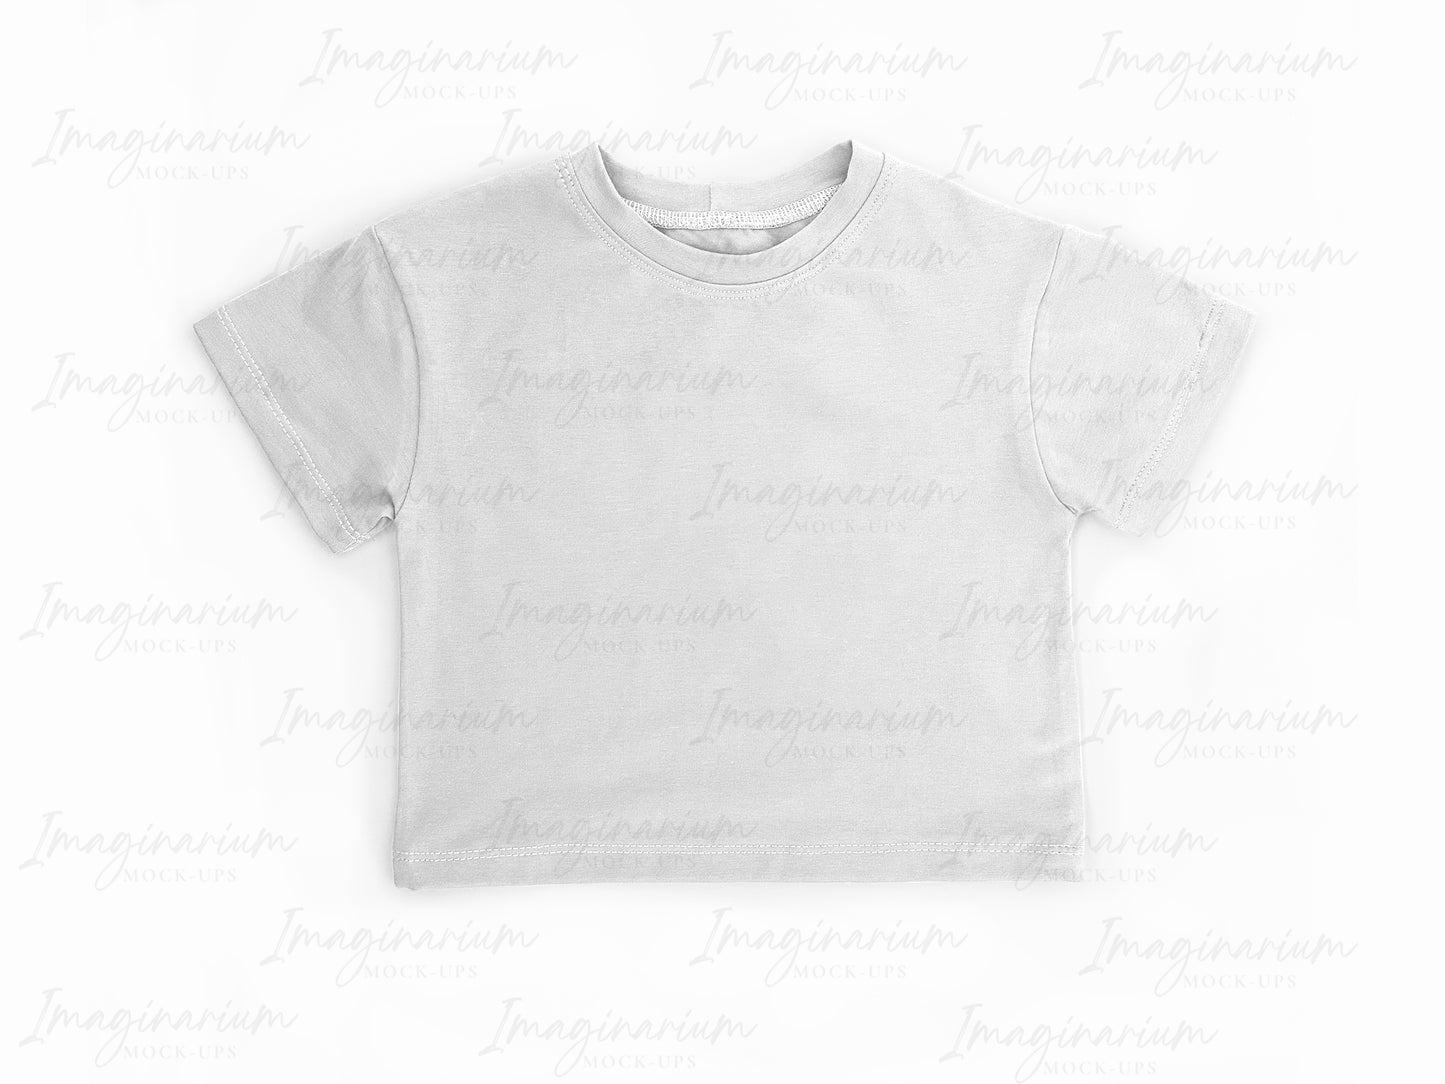 Gus + Steel Short Sleeve Cropped Drop Shoulder Tee Shirt Mockup, Realistic Clothing Mock Up for Photoshop and Procreate